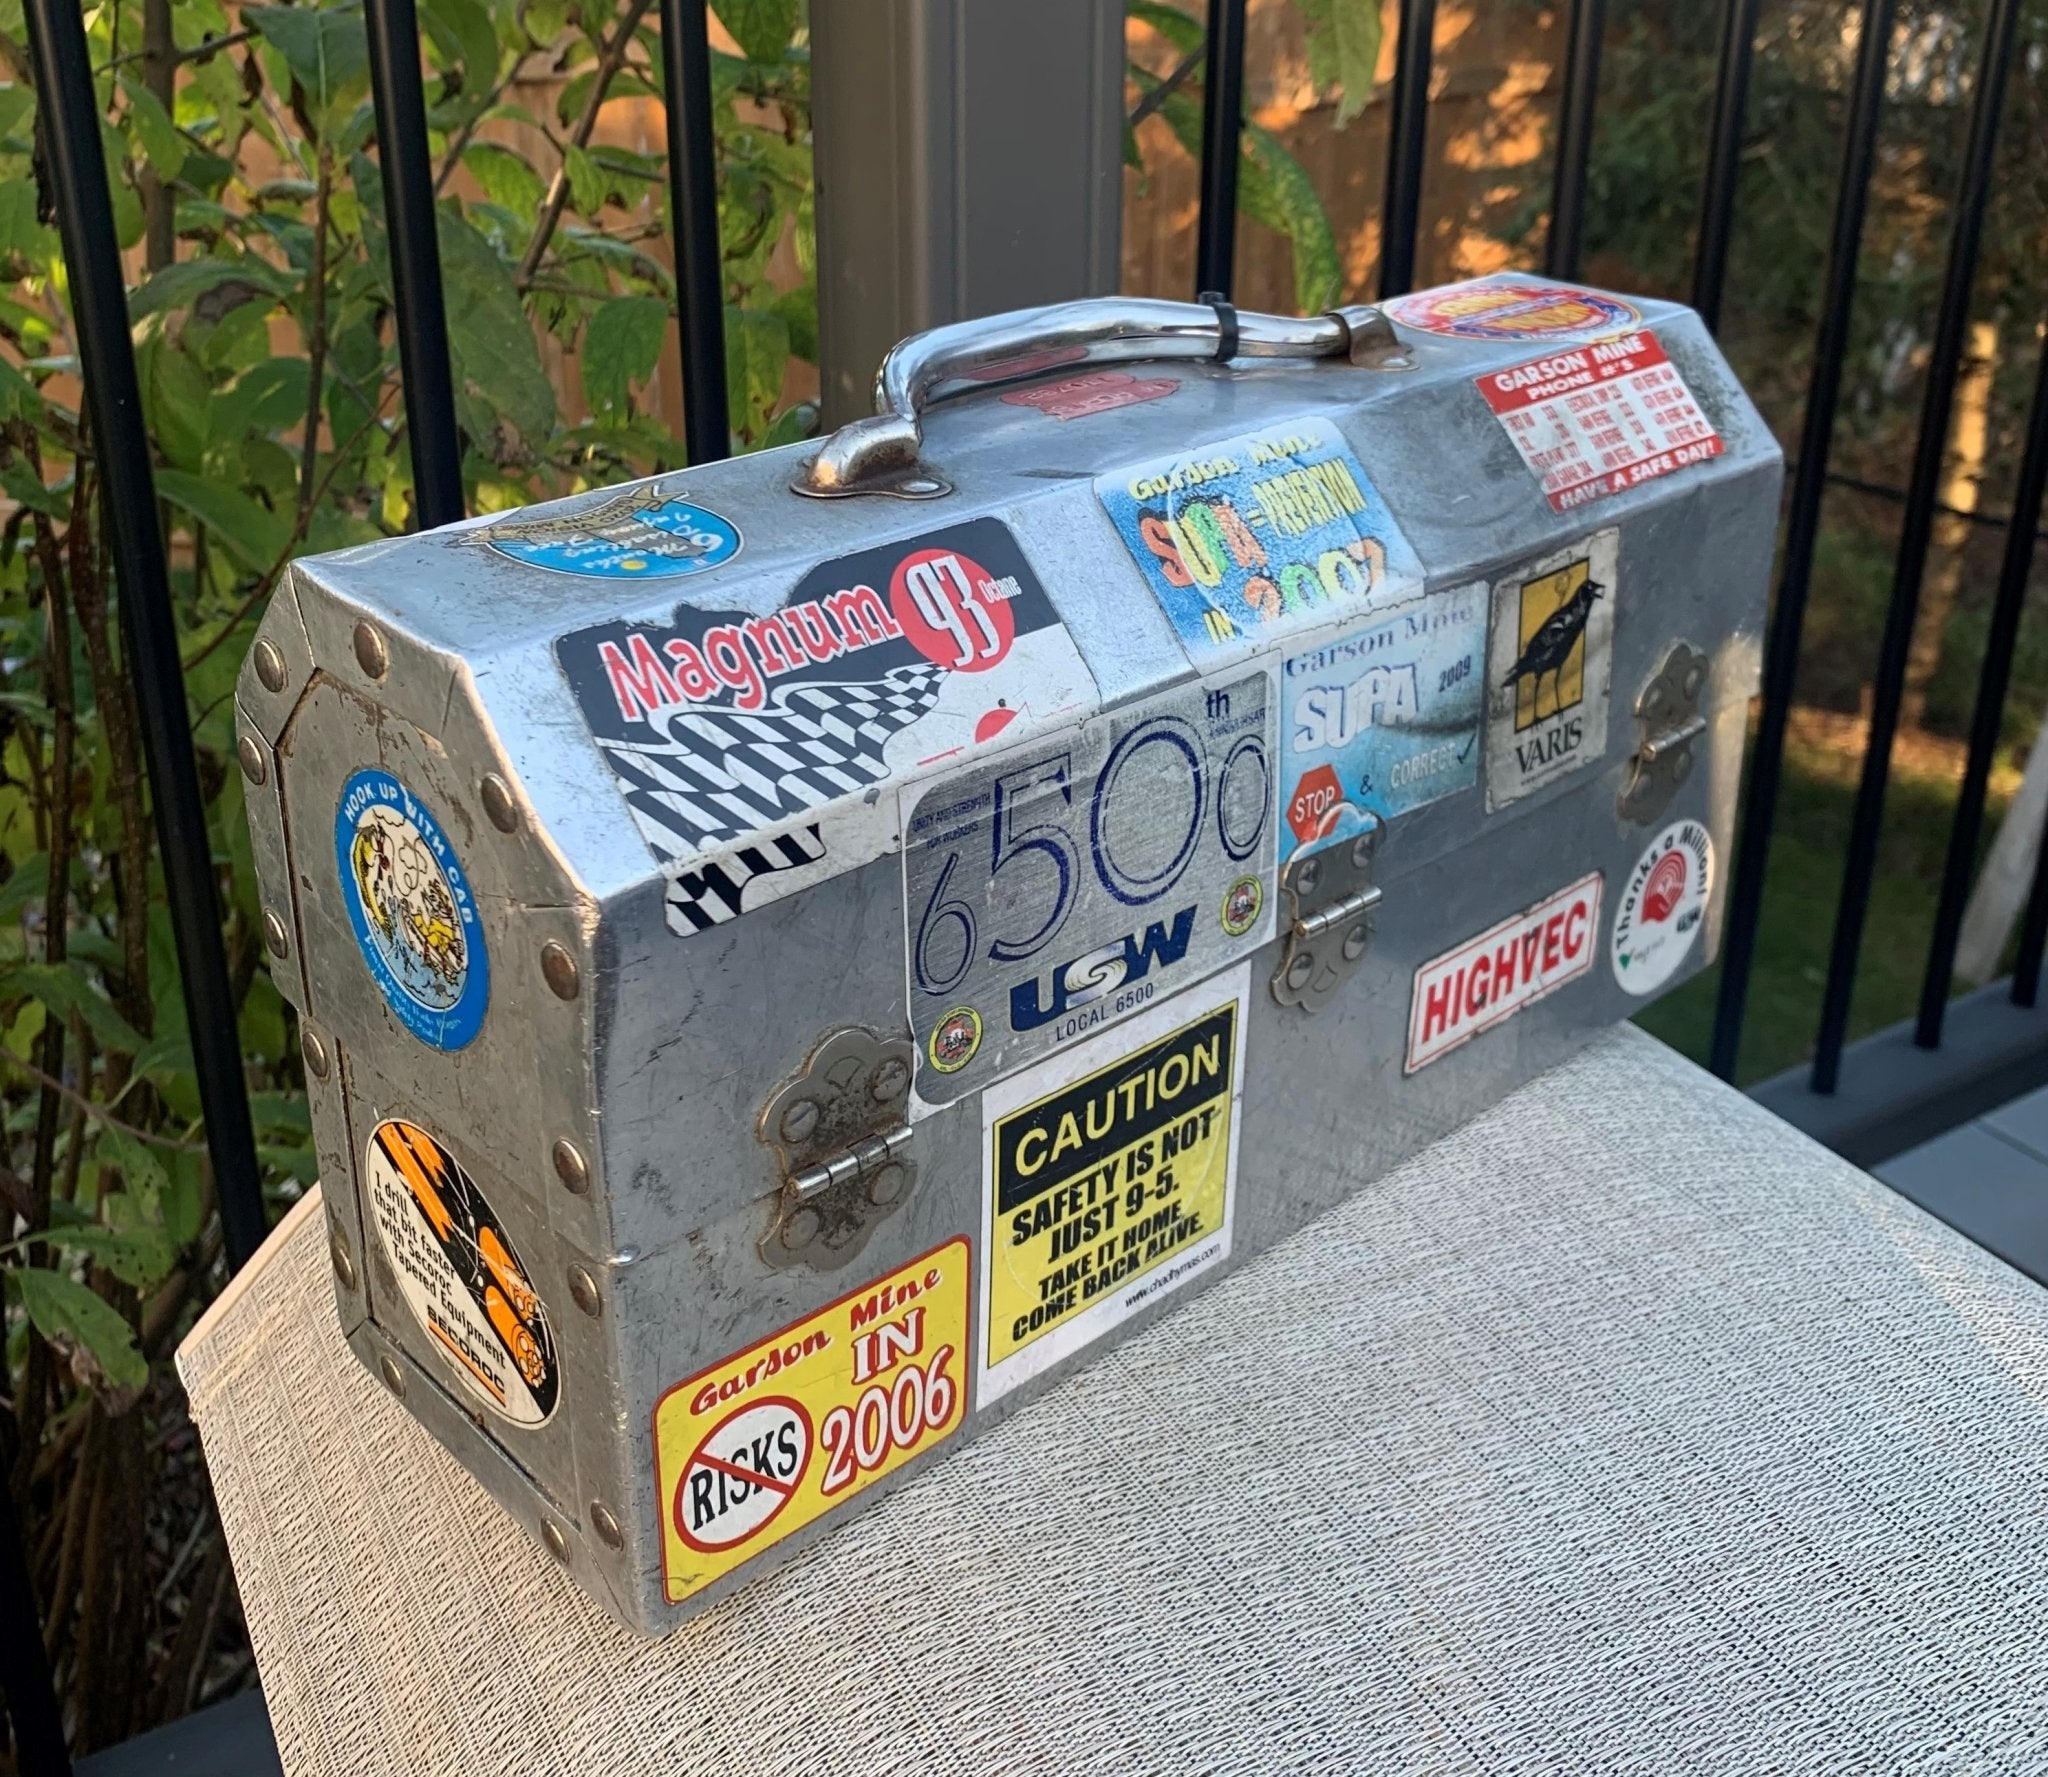 L. May lunchbox of an electrician with stickers